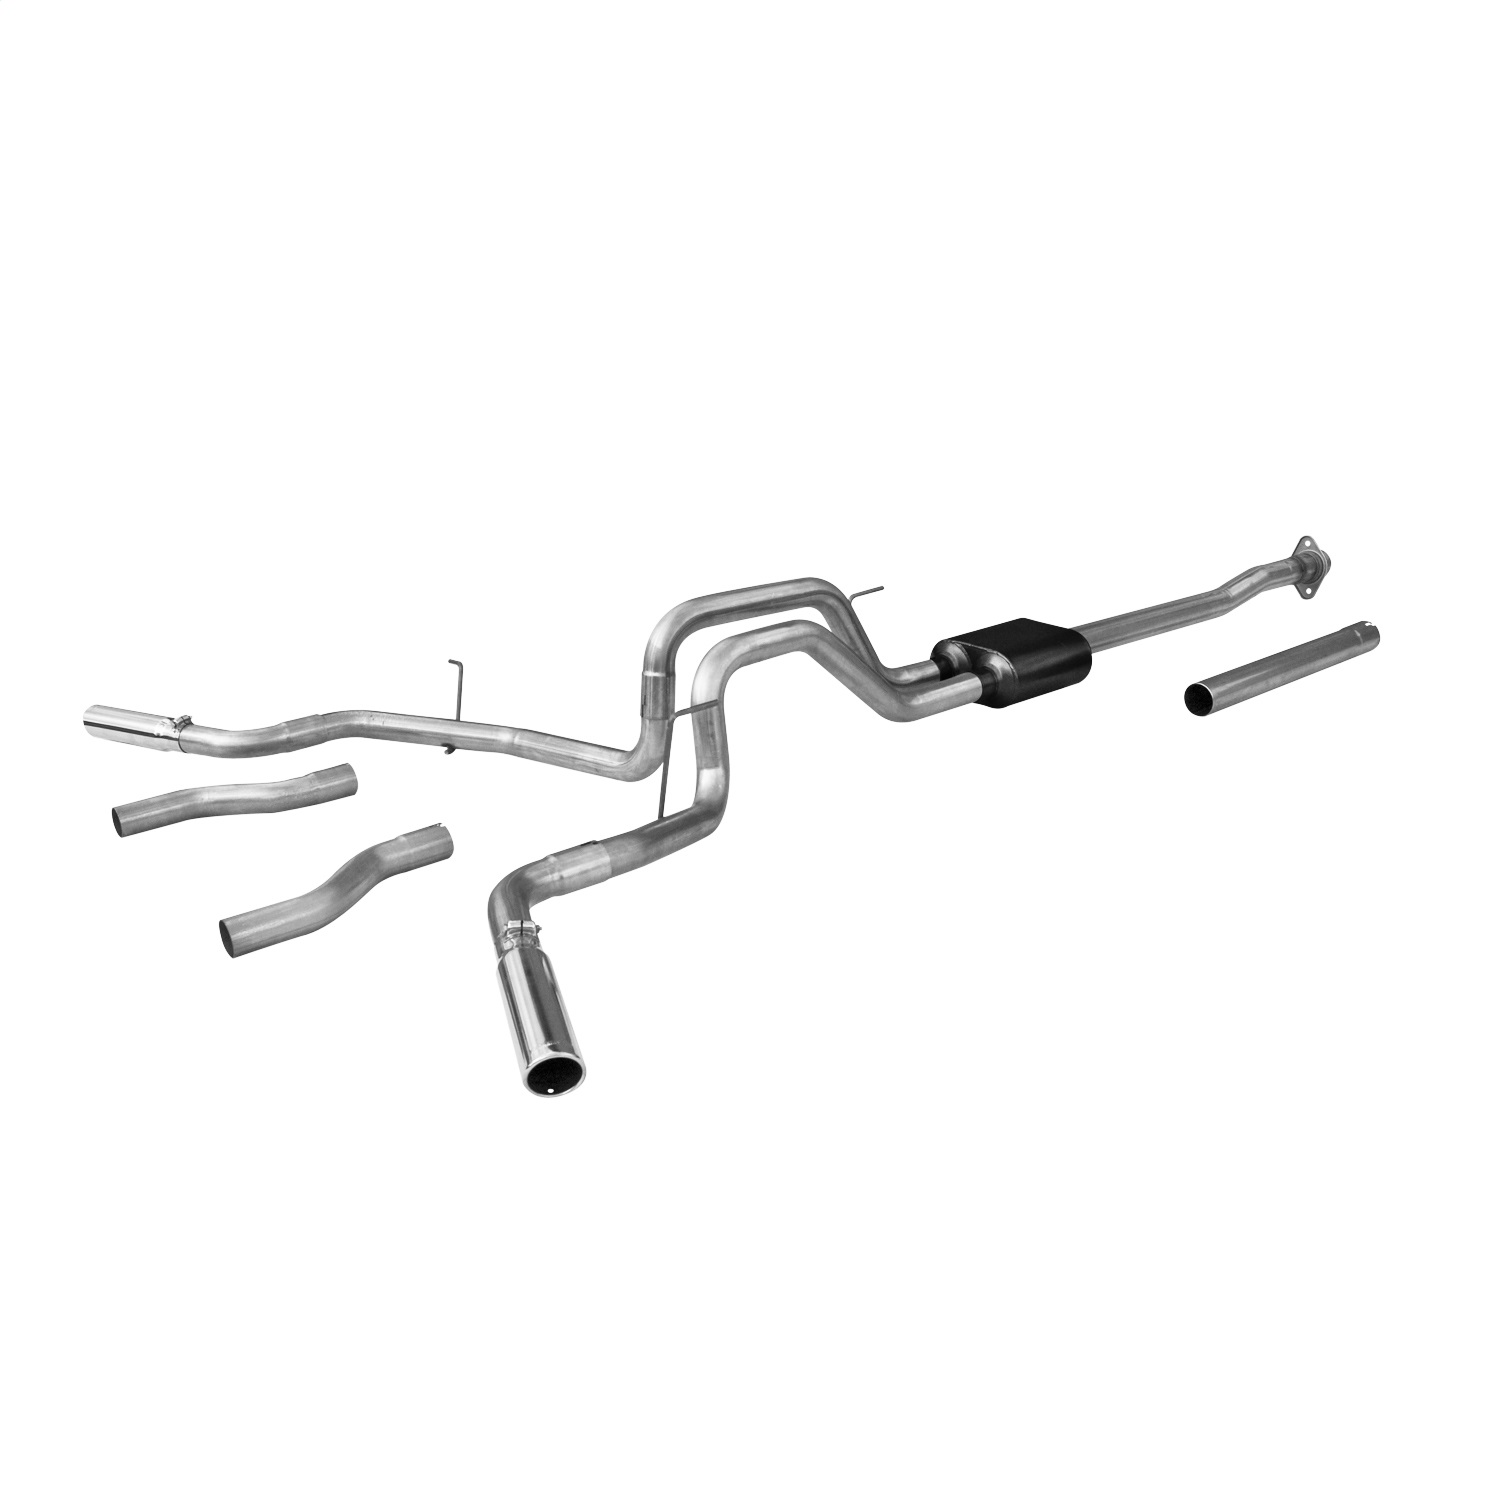 Flowmaster Flowmaster 817522 American Thunder Cat Back Exhaust System Fits 09-14 F-150